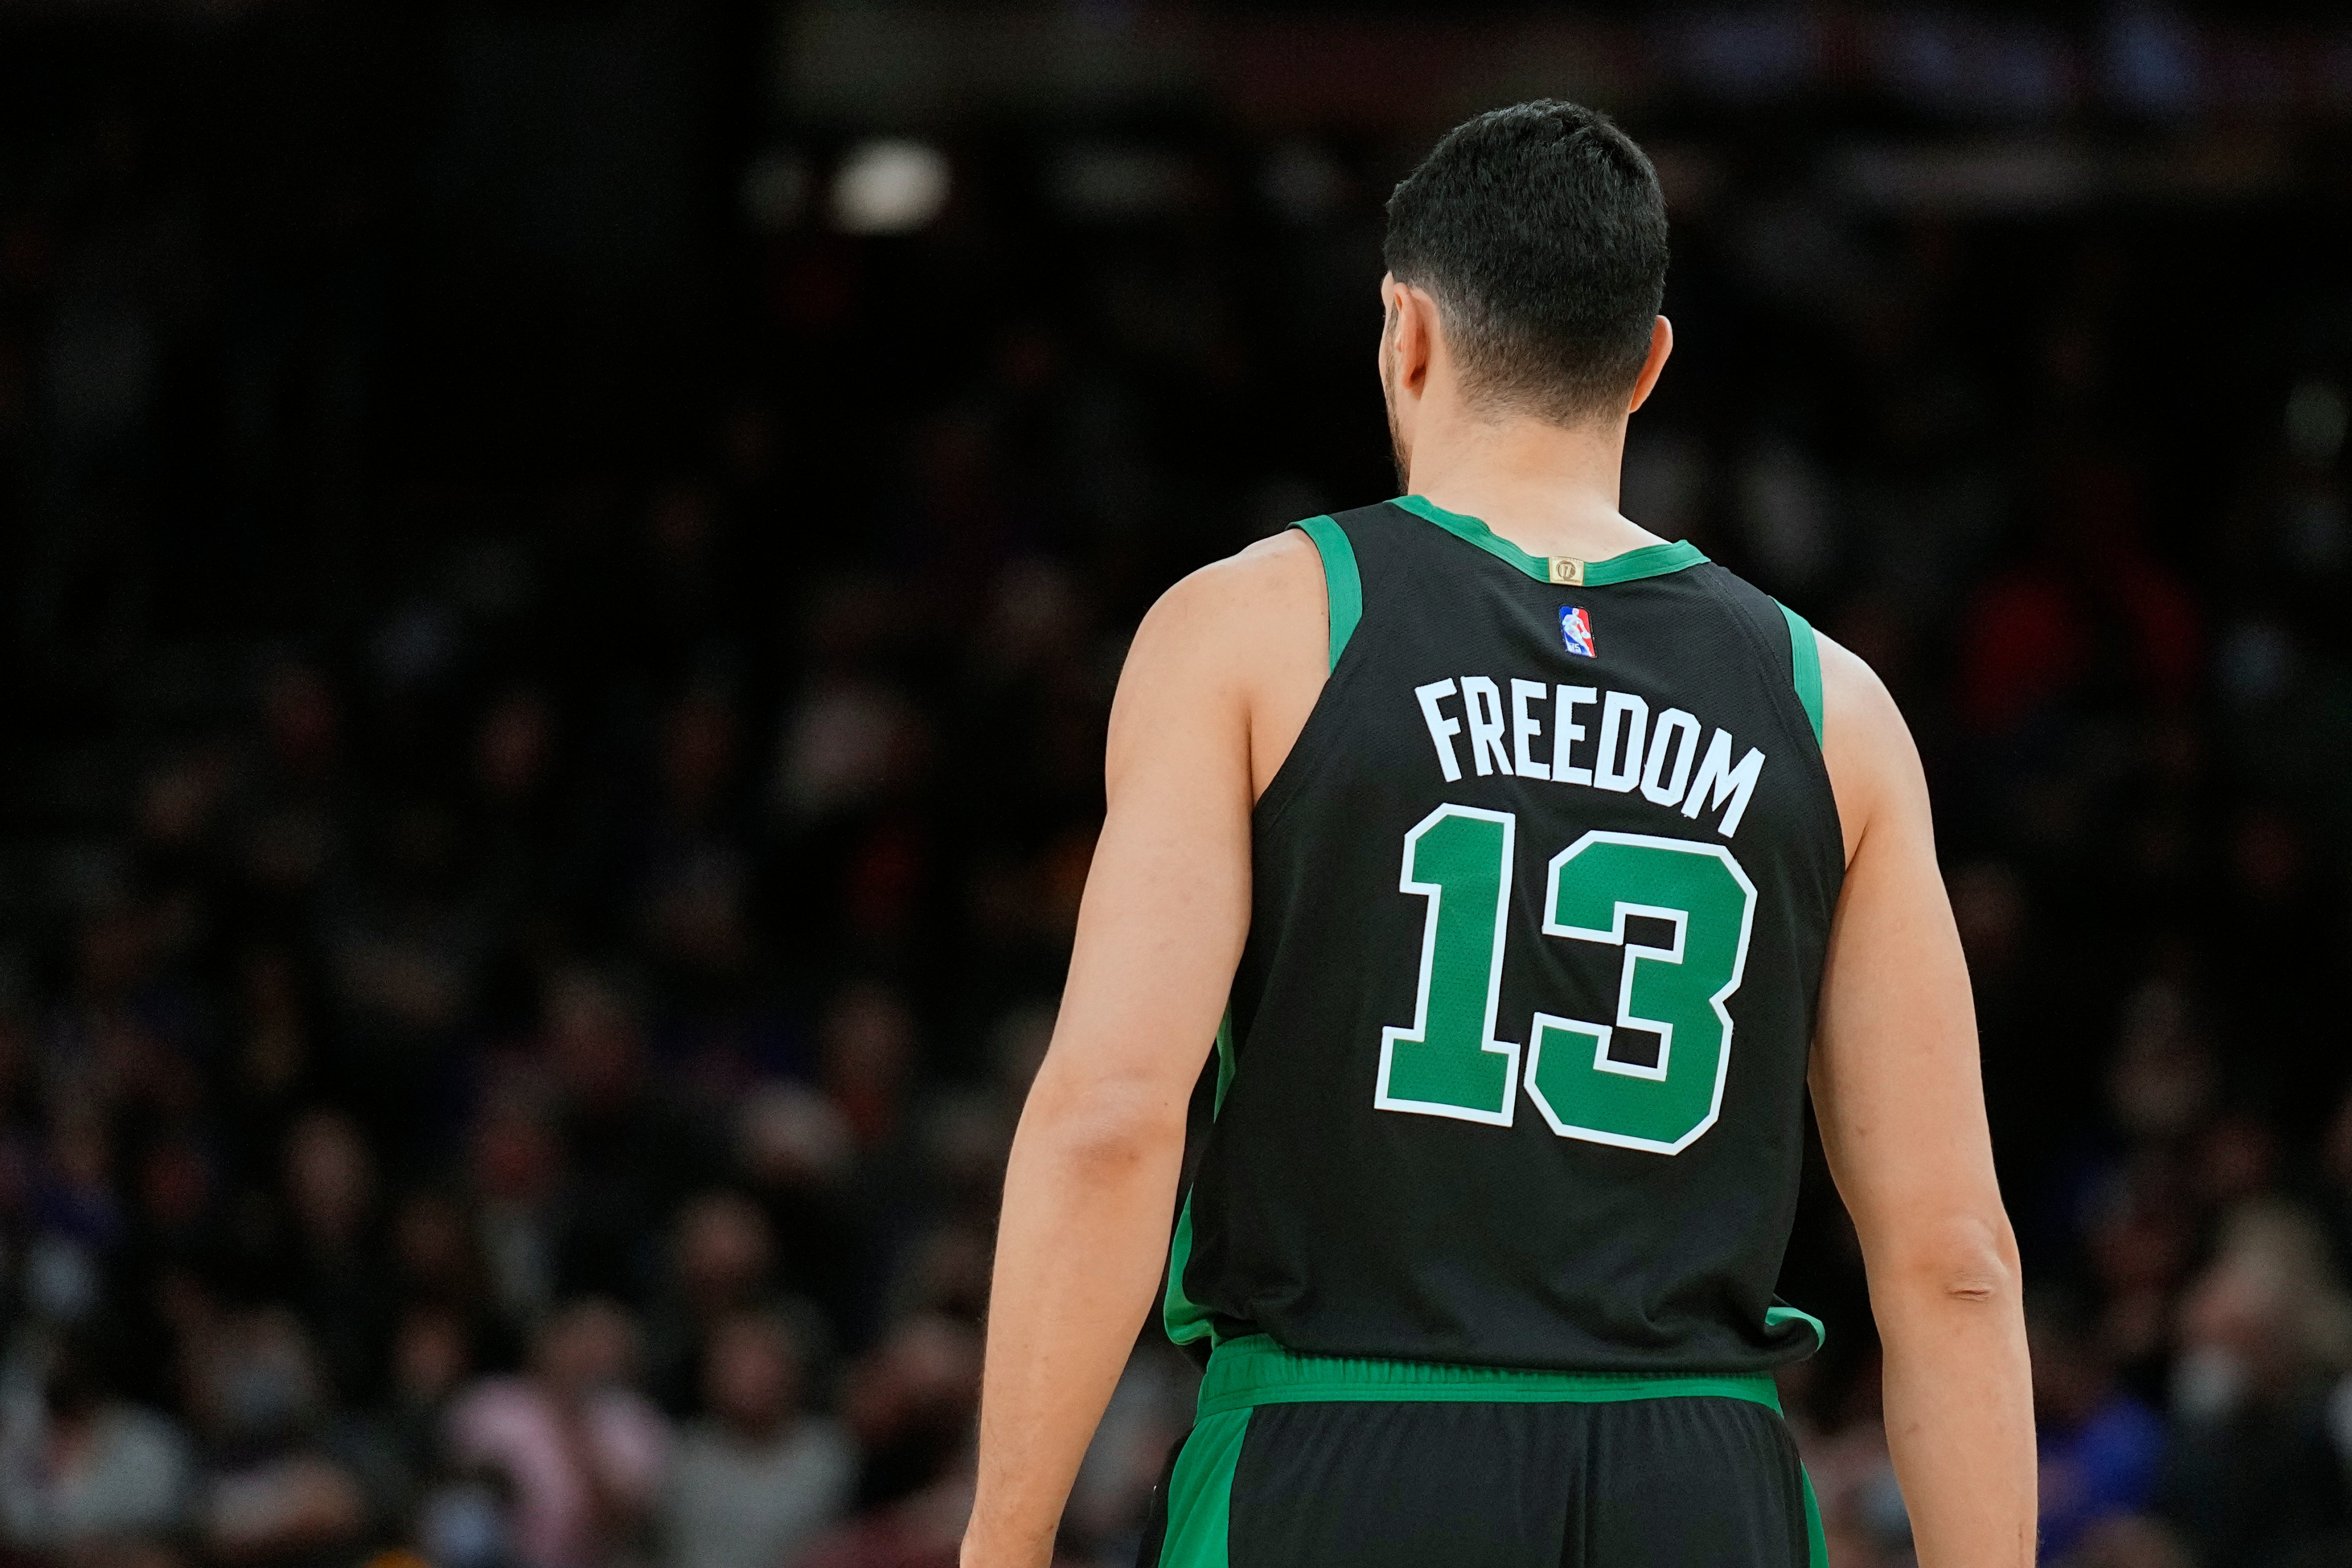 Boston Celtics center Enes Freedom (13) during the first half of an NBA basketball game against the Phoenix Suns, Friday, Dec. 10, 2021, in Phoenix. (Rick Scuteri-AP Photo)